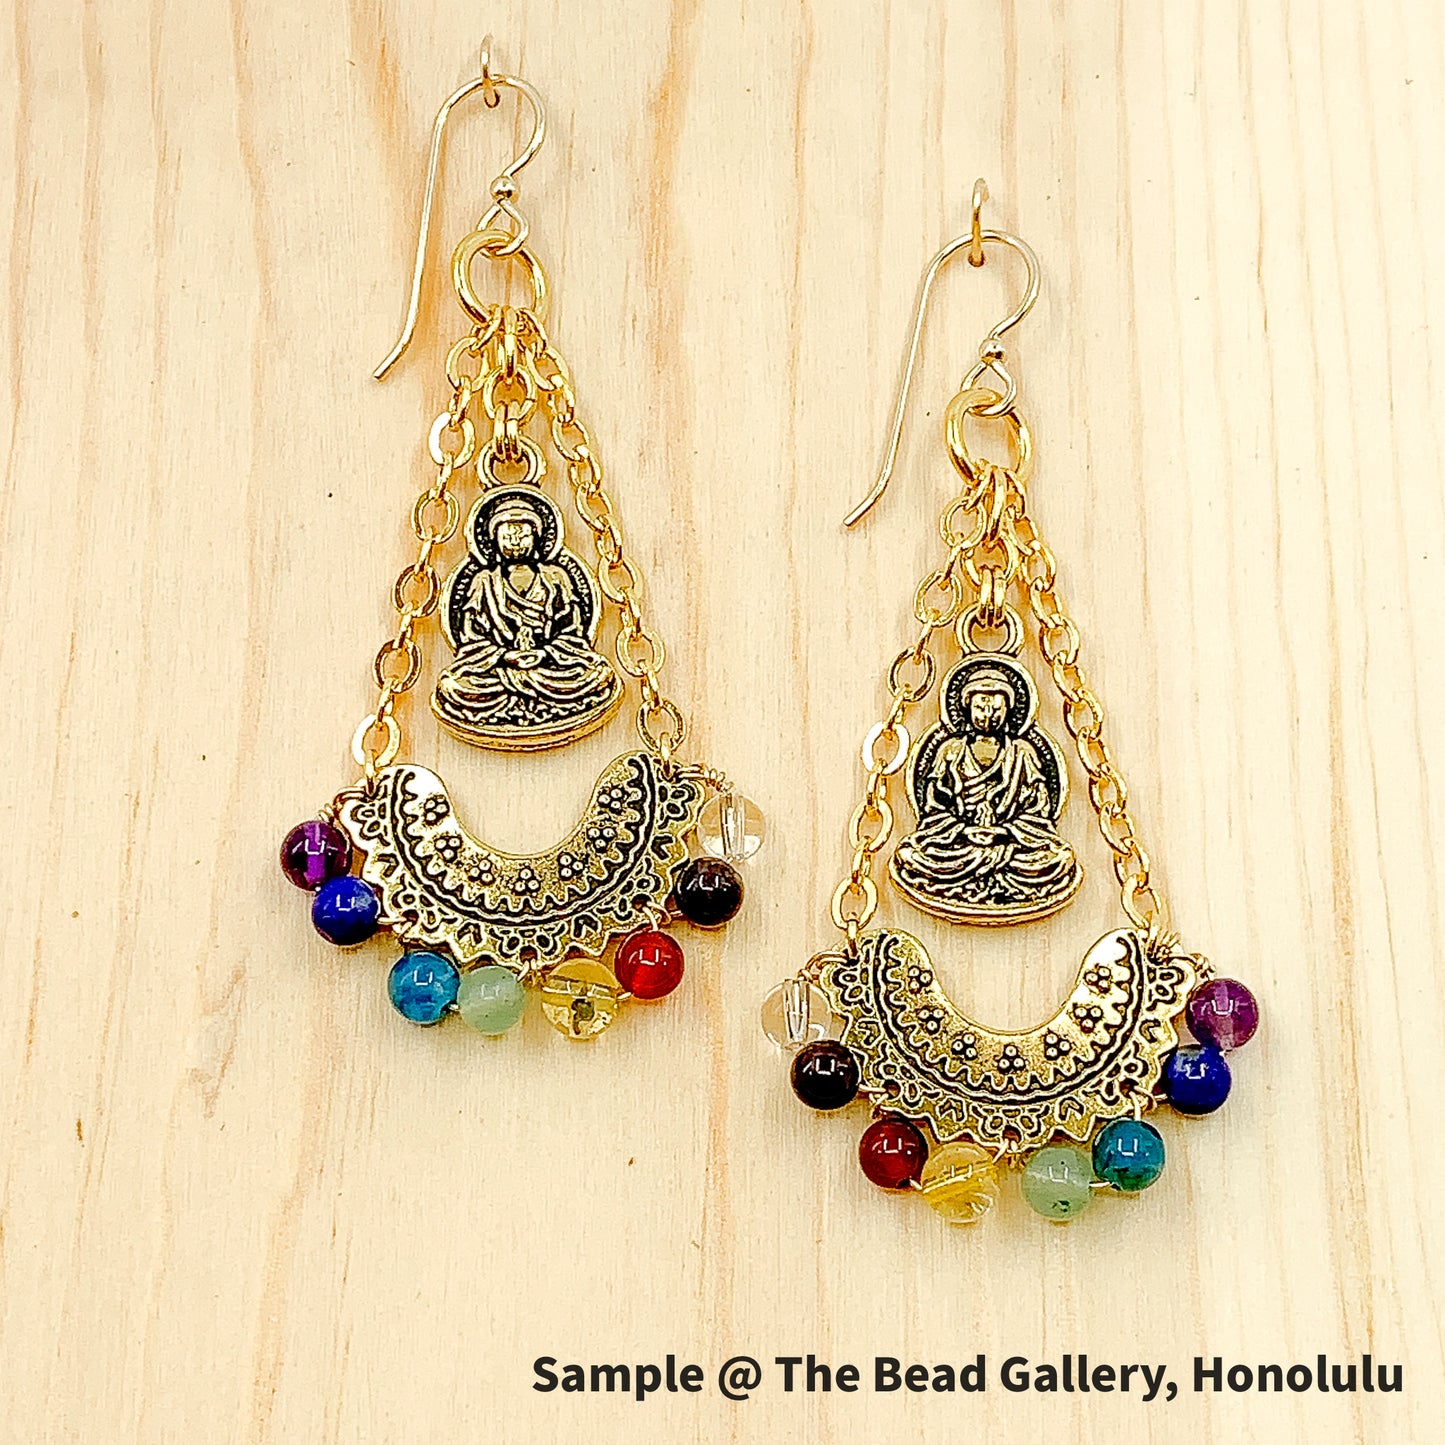 Seated Buddha Pendant (4 Colors Available) - 1 pc.